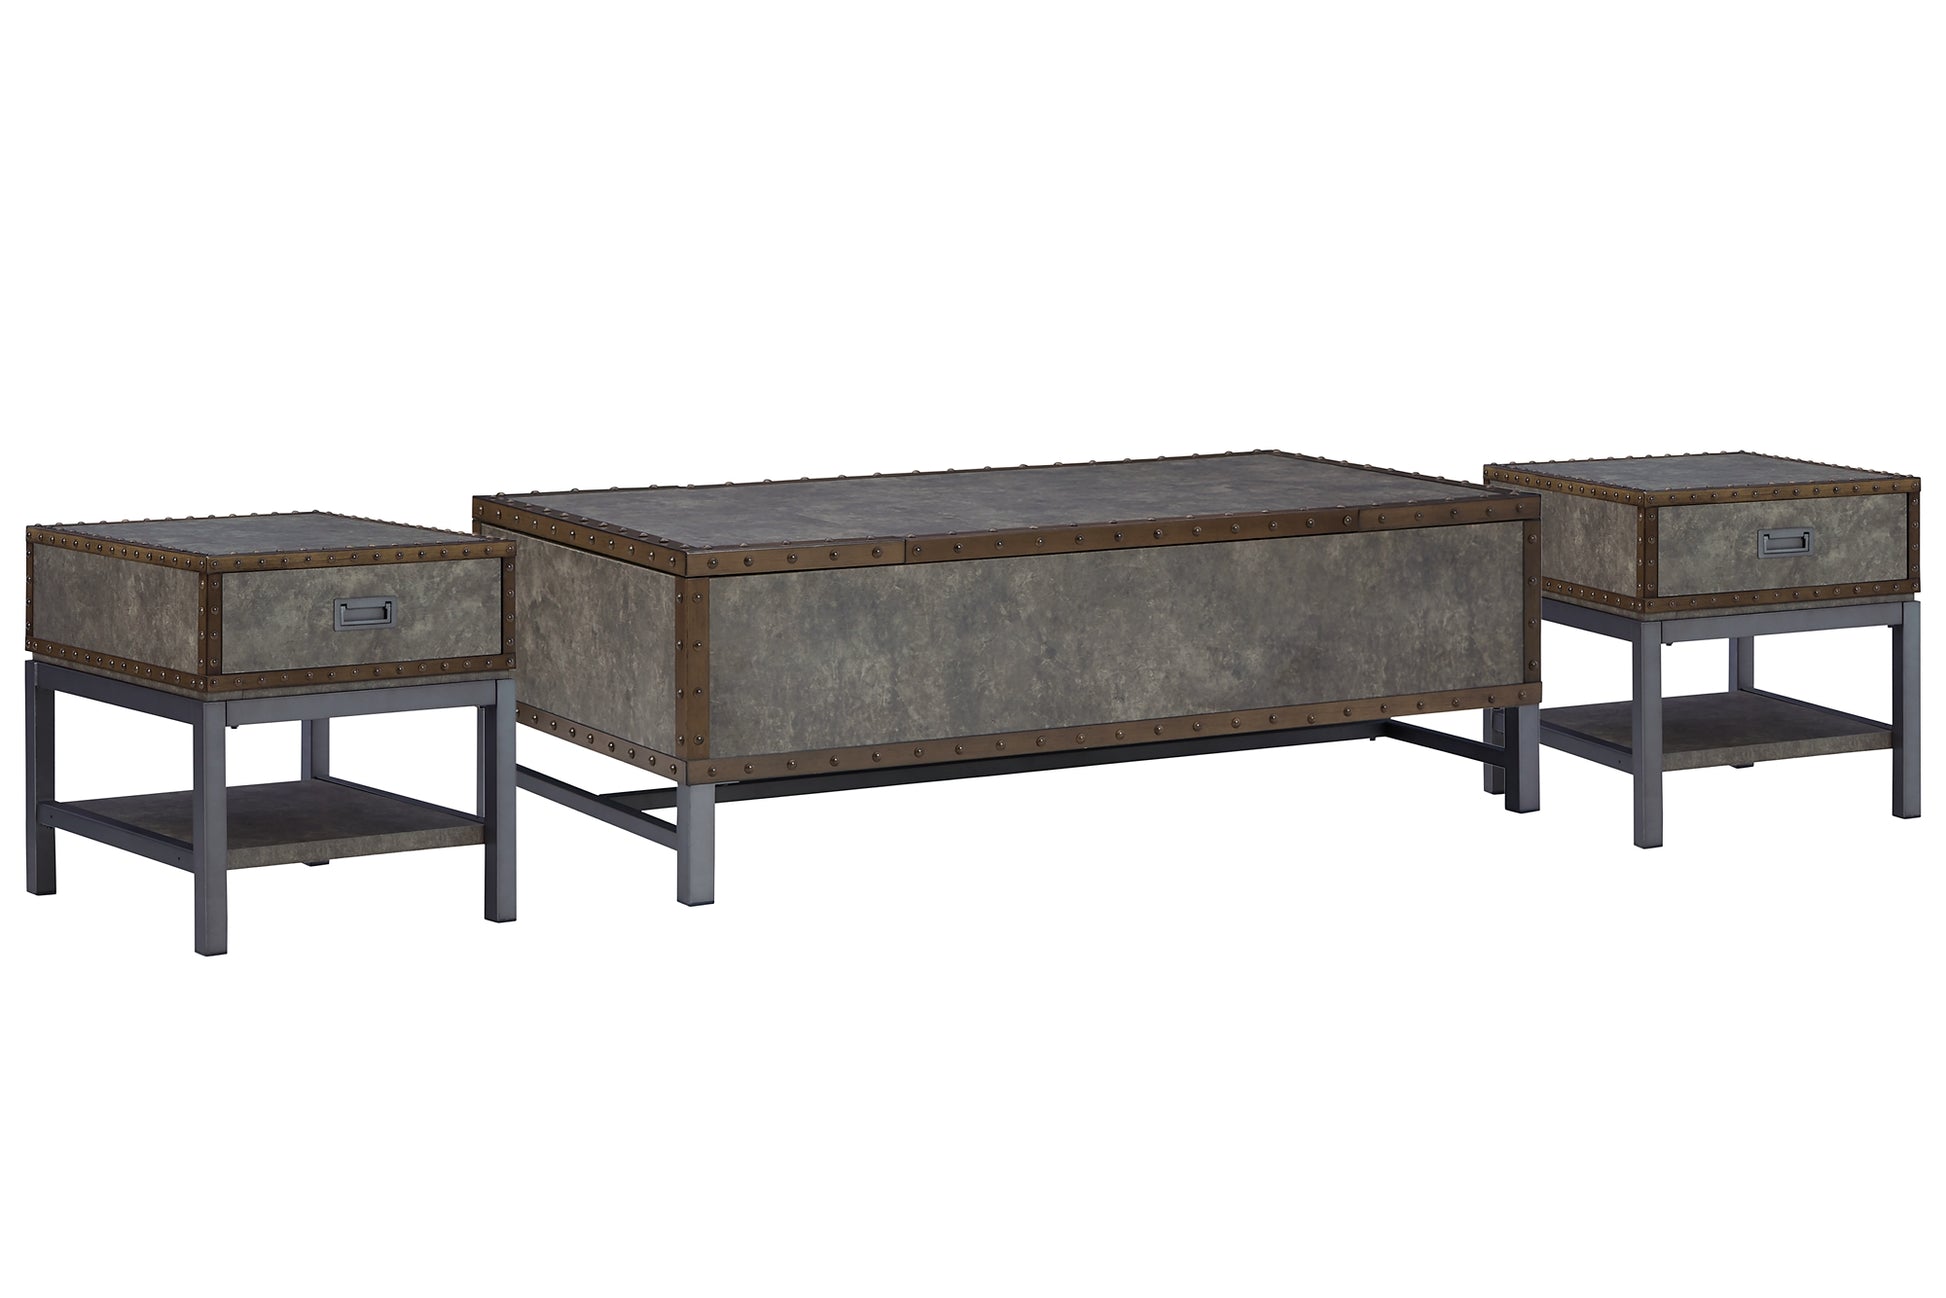 Derrylin Coffee Table with 2 End Tables JB's Furniture  Home Furniture, Home Decor, Furniture Store